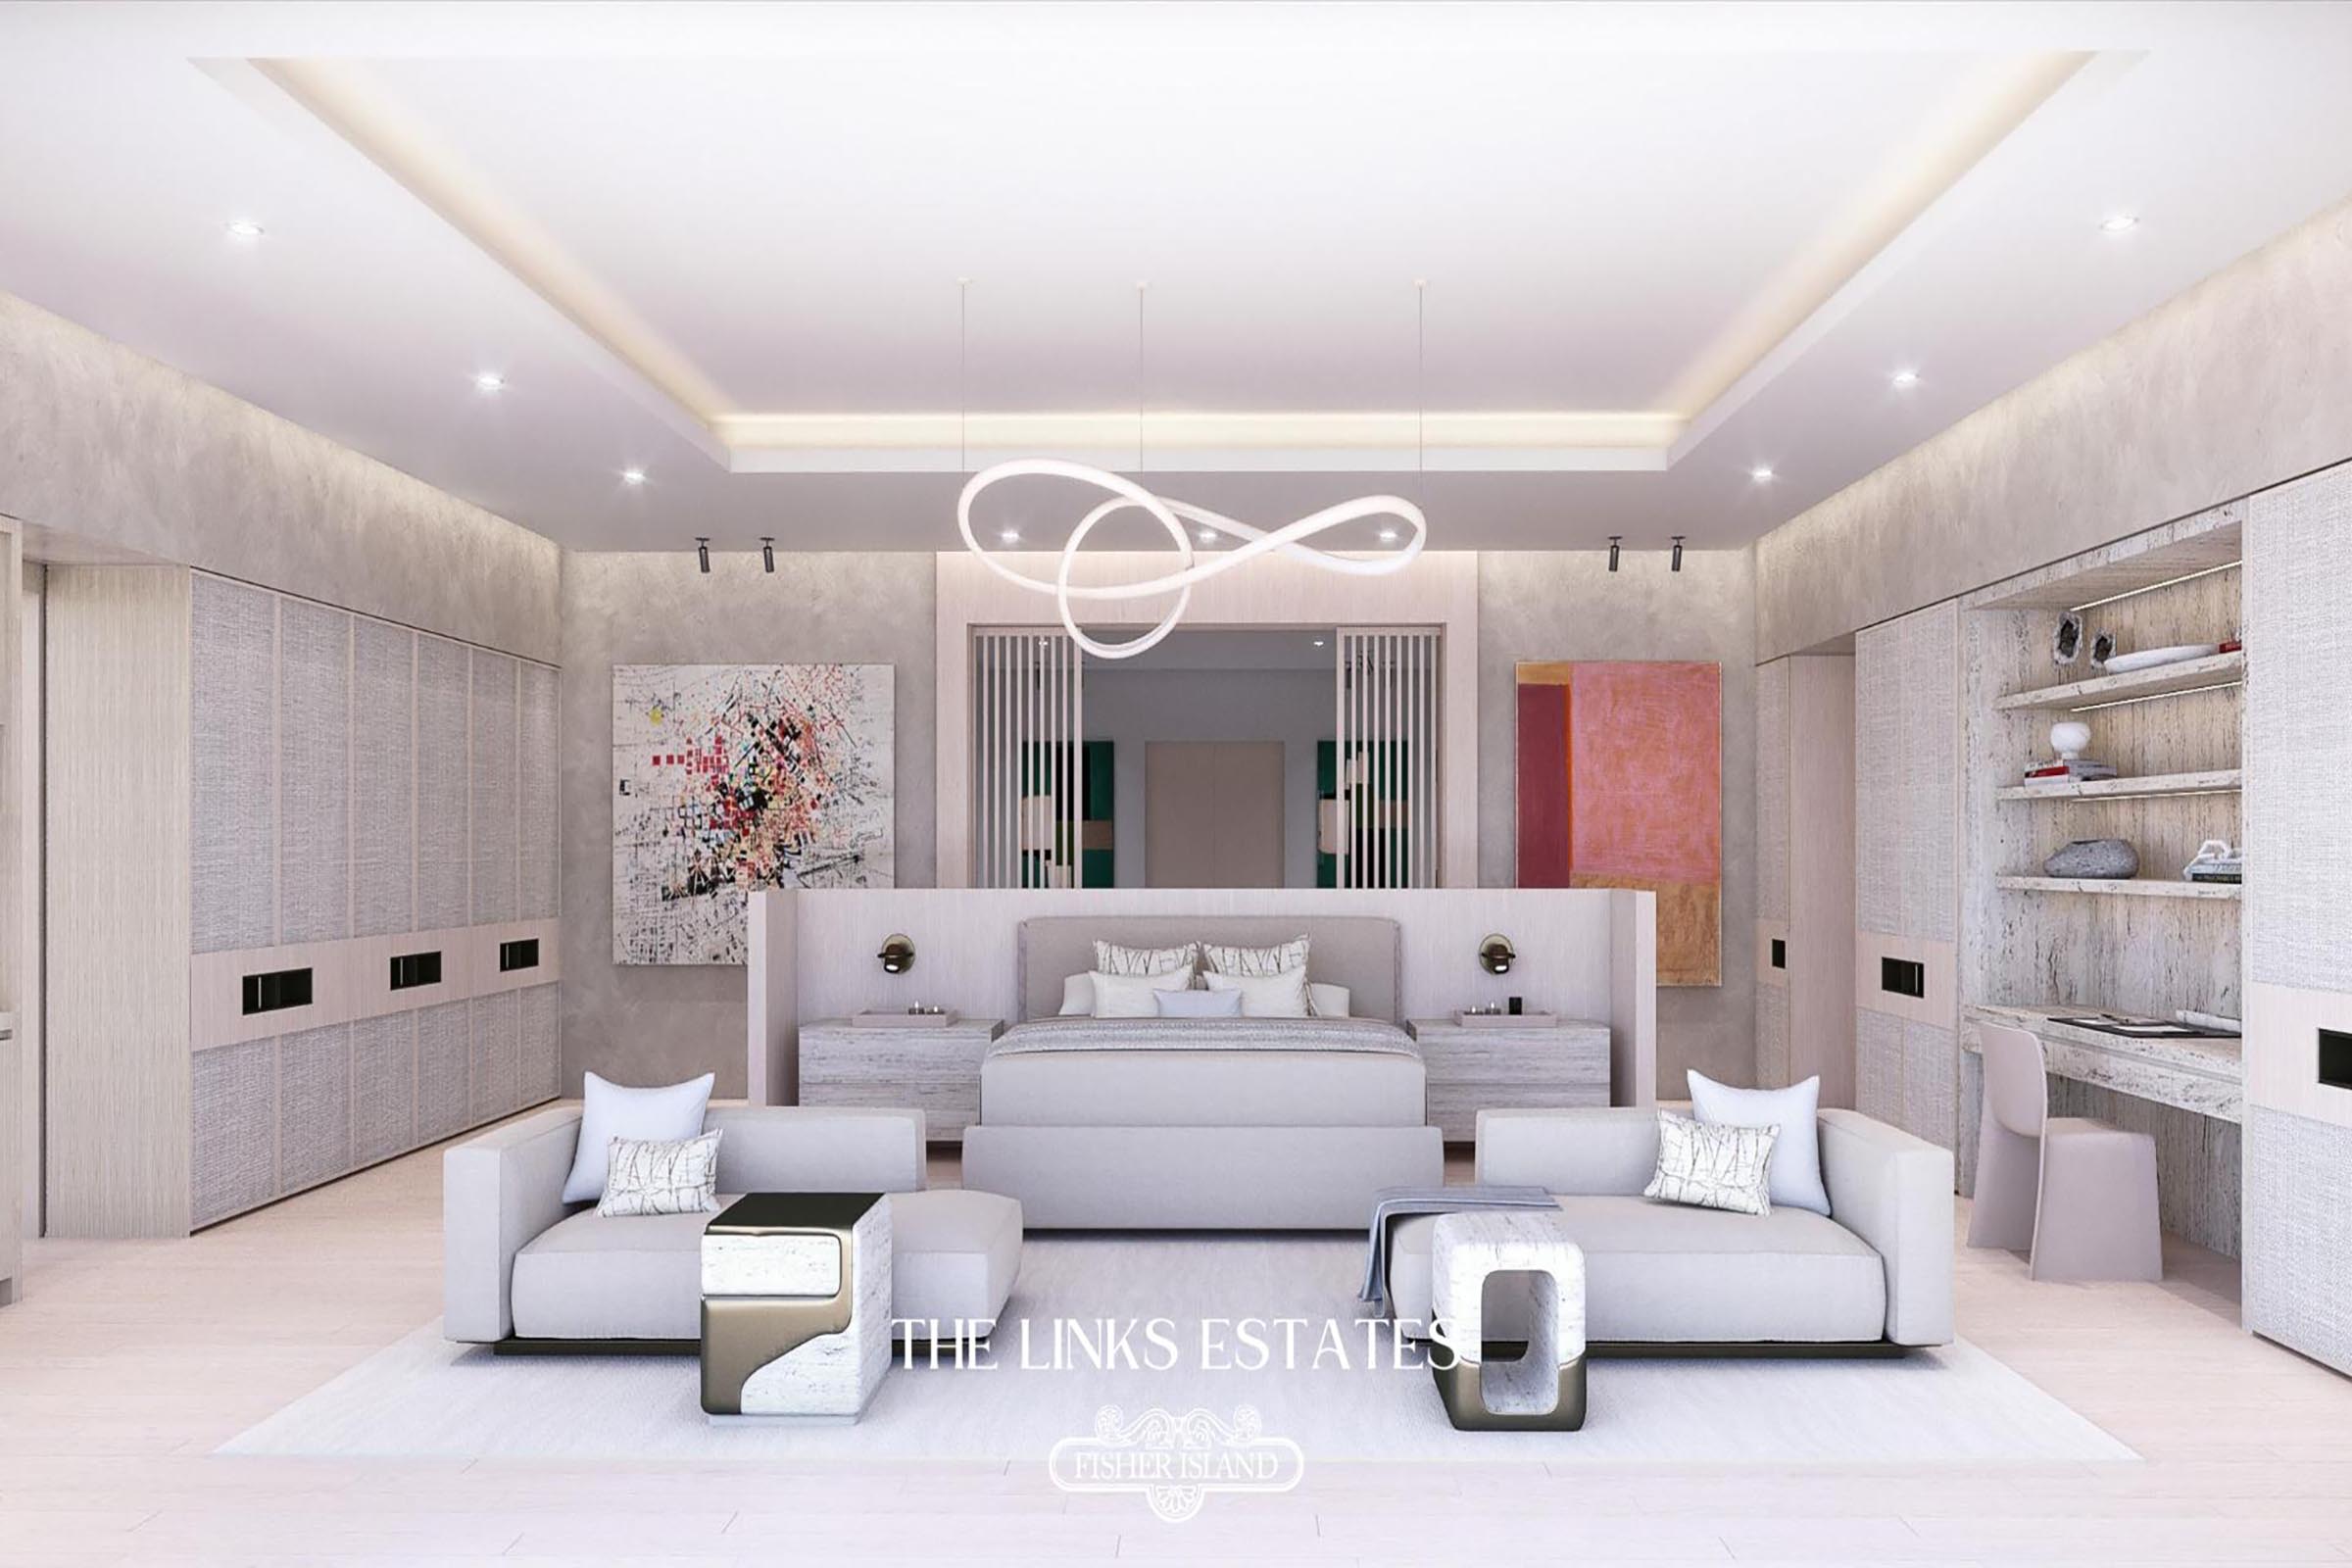 Rendering of The Links Estates Fisher Island Residence 5 Primary Bedroom